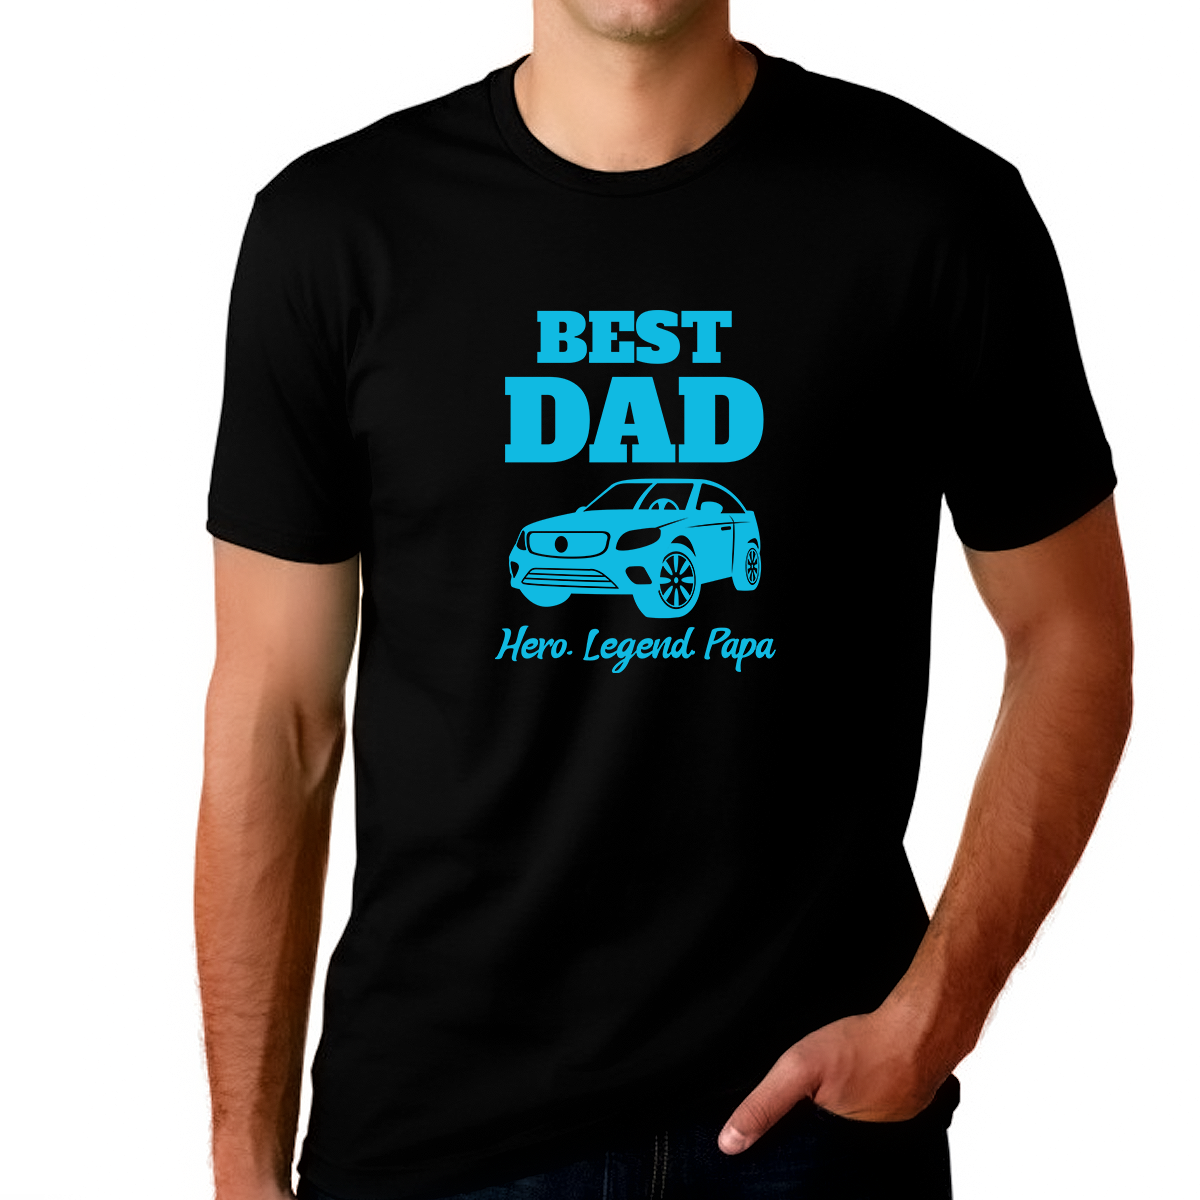 Dad Shirts for Men Fathers Day Shirt Car Dad Shirt Best Dad Shirt First Fathers Day Gifts